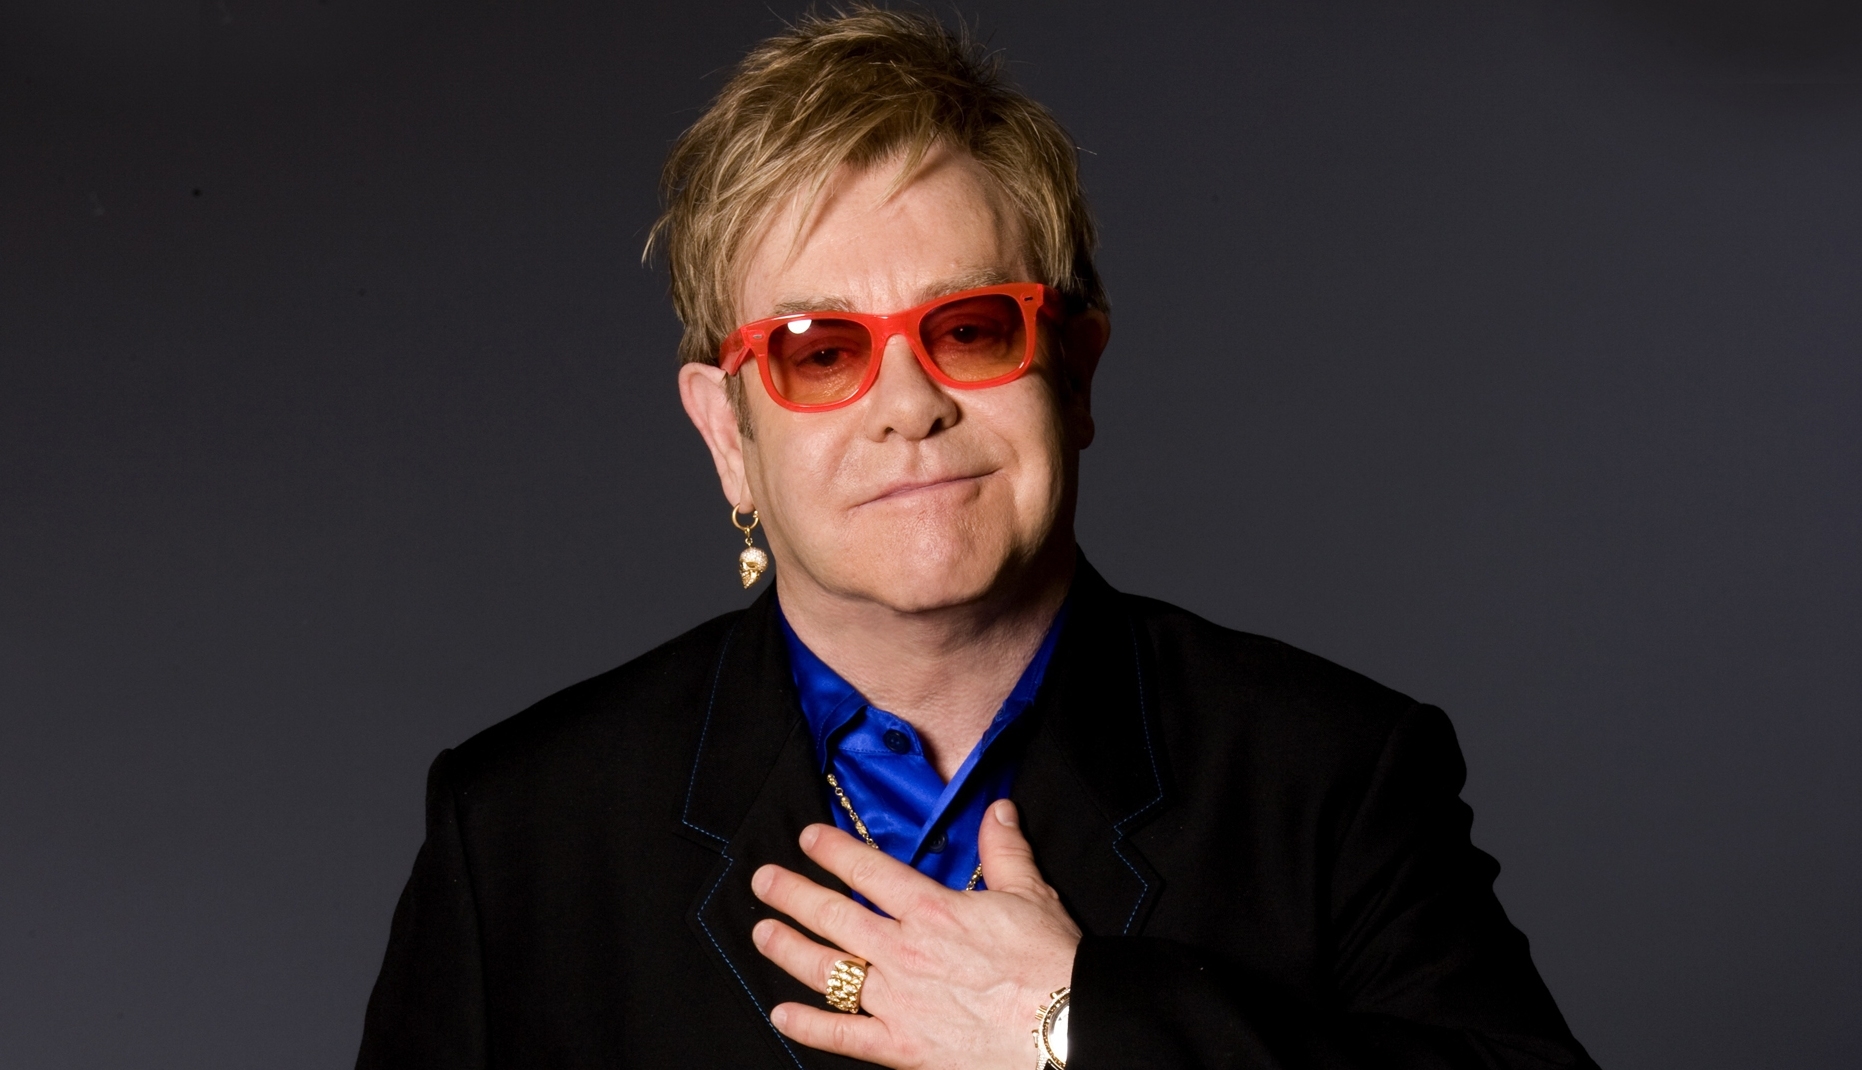 Midweek ARIA Predictions: Elton John’s first album since in 10 years to debut in Top 10